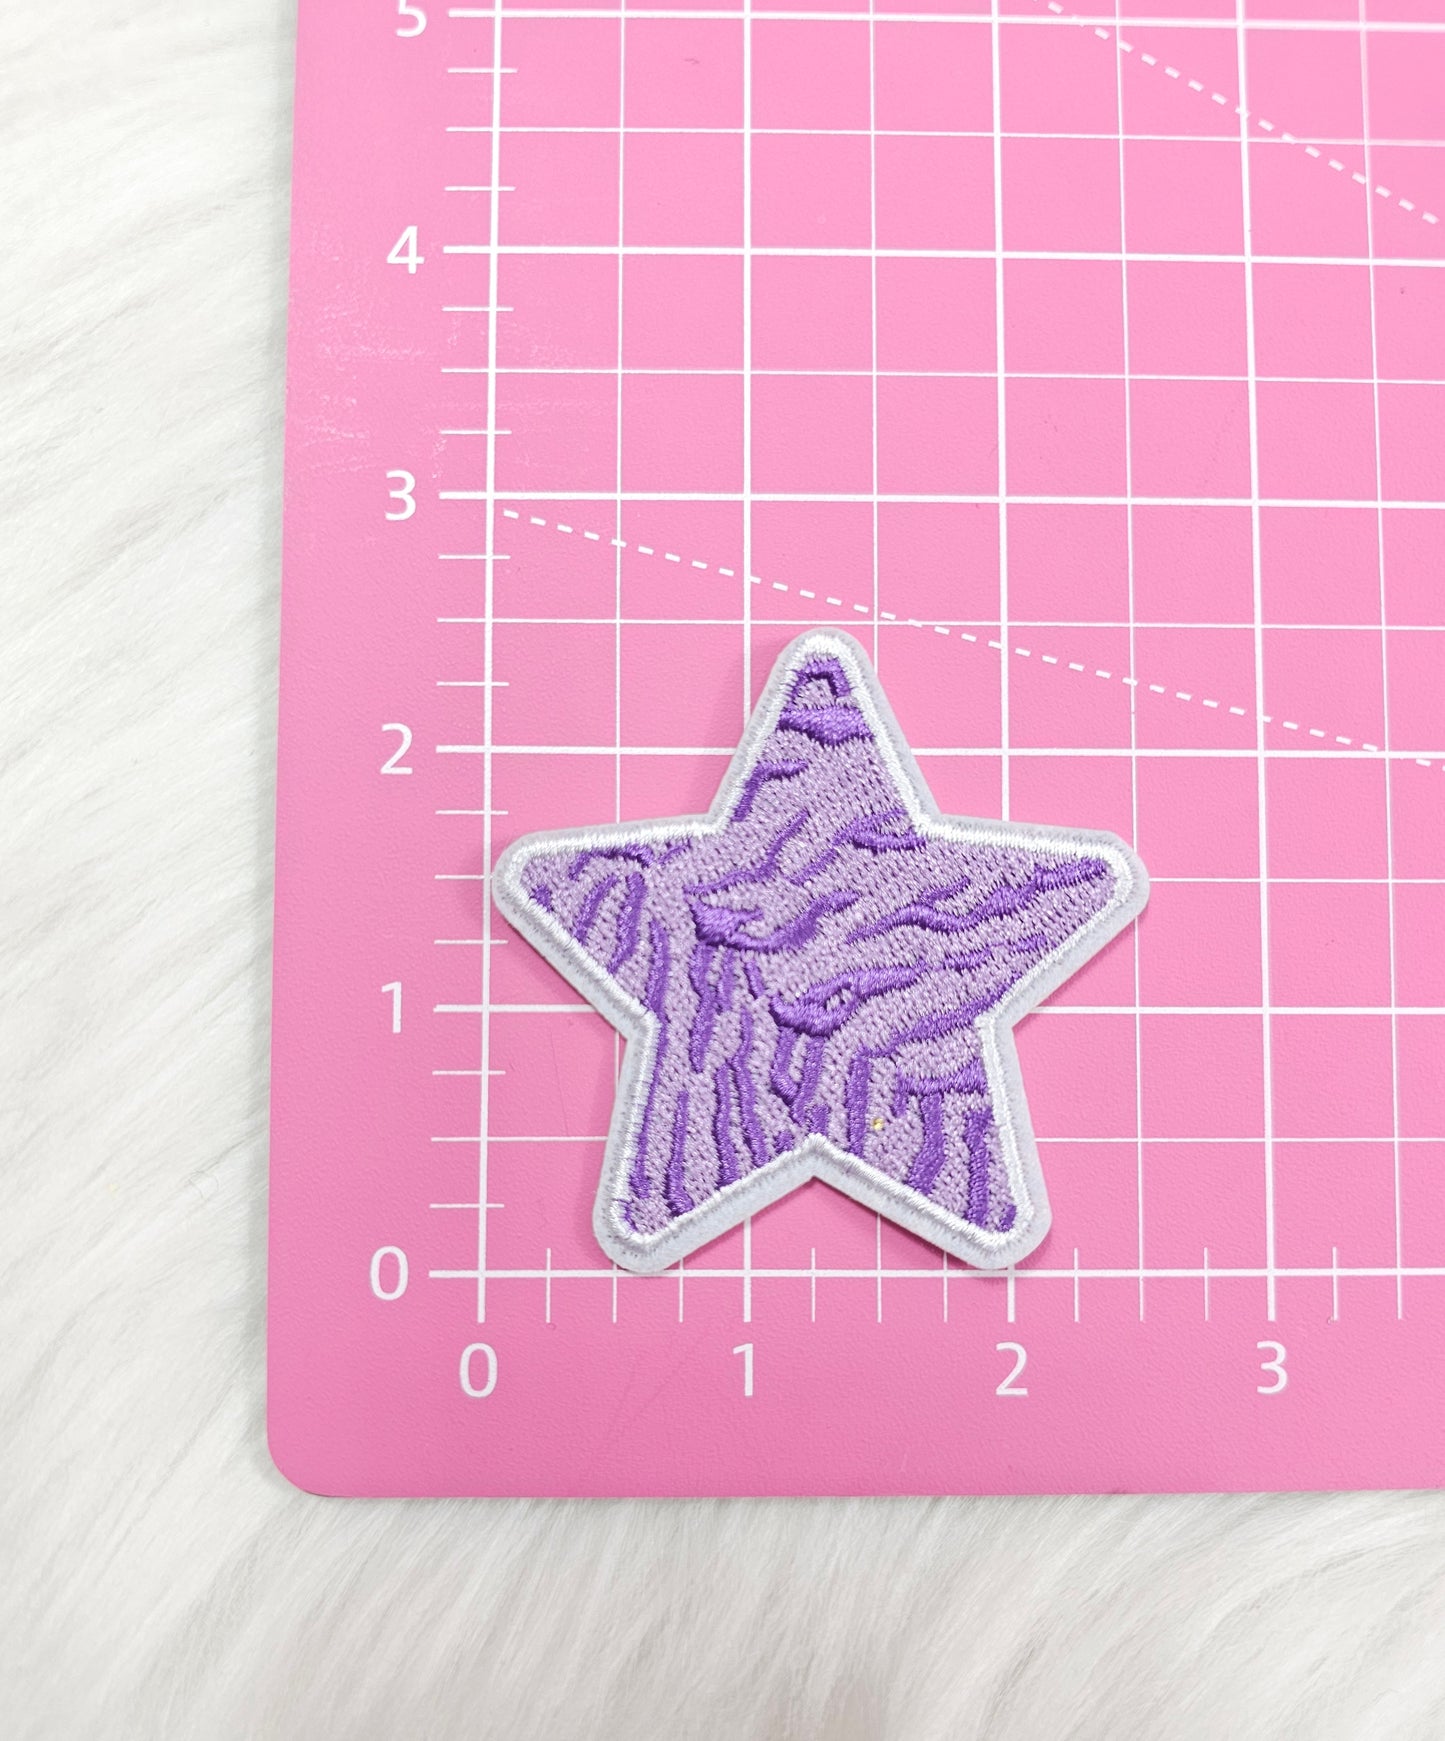 Purple Animal Tiger Stripe Star Embroidery Iron On Patch